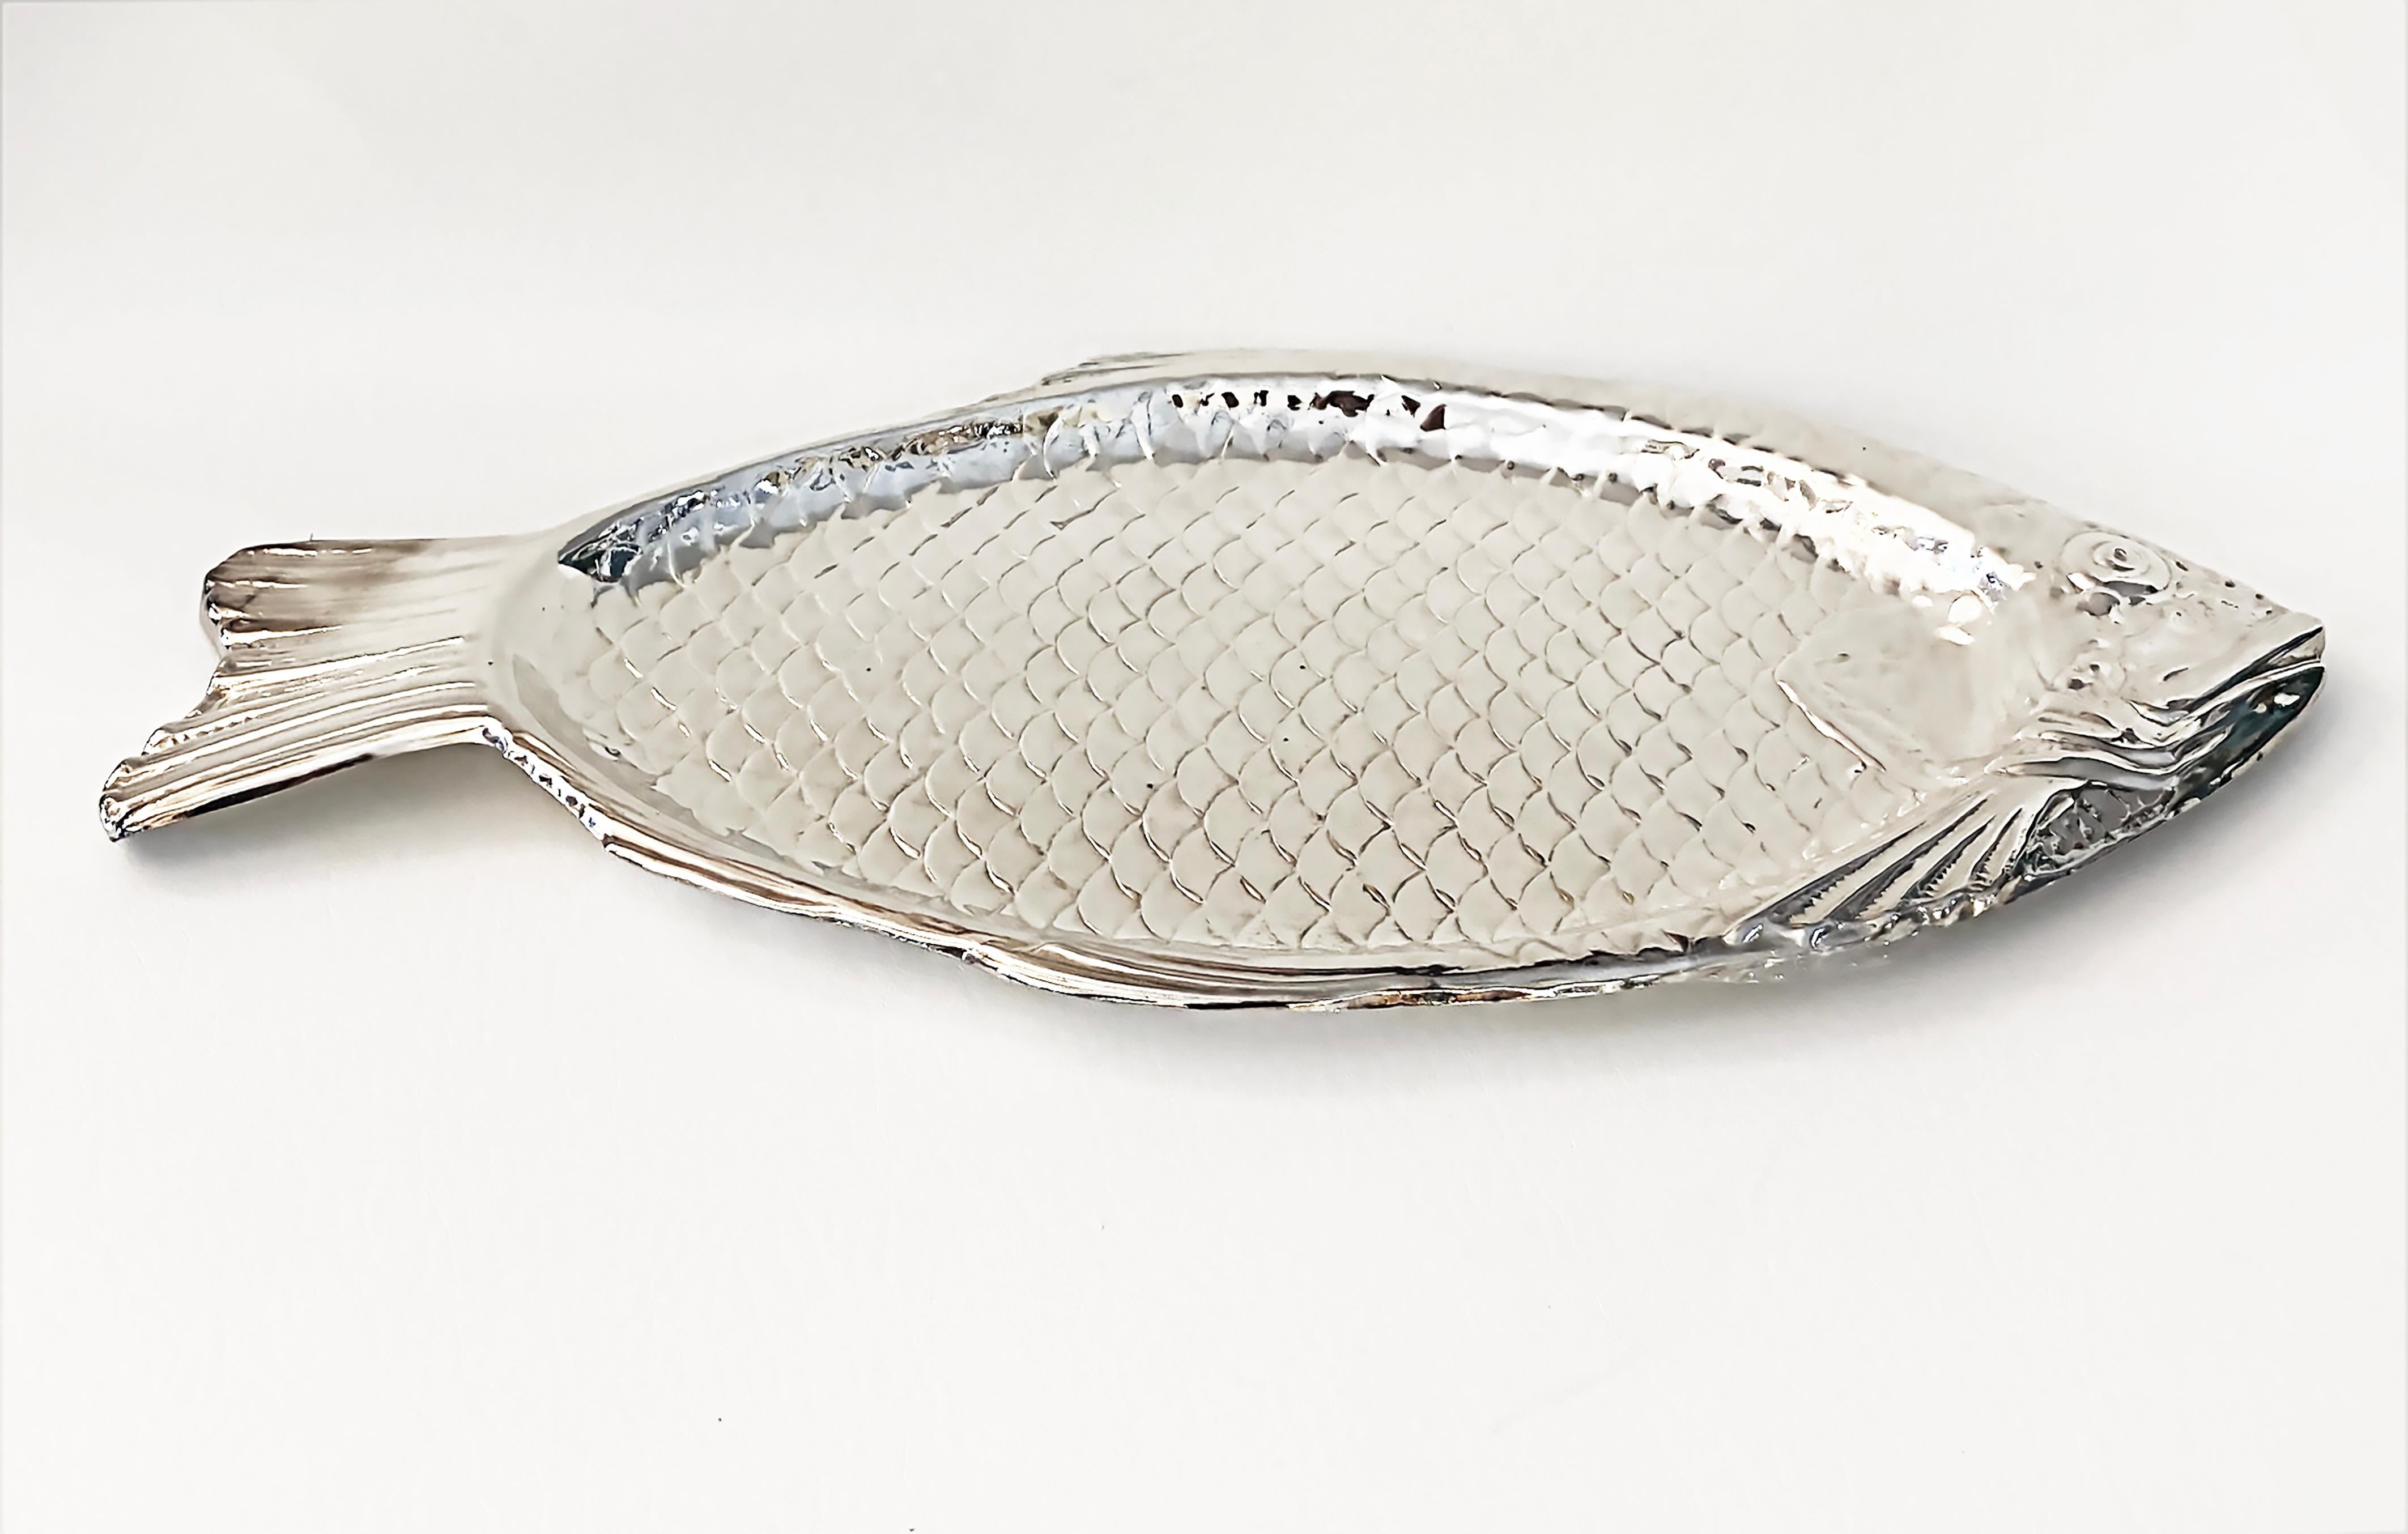 Reed & Barton Large Silver Plate Fish Serving Platter, Late 20th Century.

Offered for sale is a Reed & Barton large silver-plate fish serving platter dating from the late 20th century. The platter is in the form of a fish and is marked Reed &